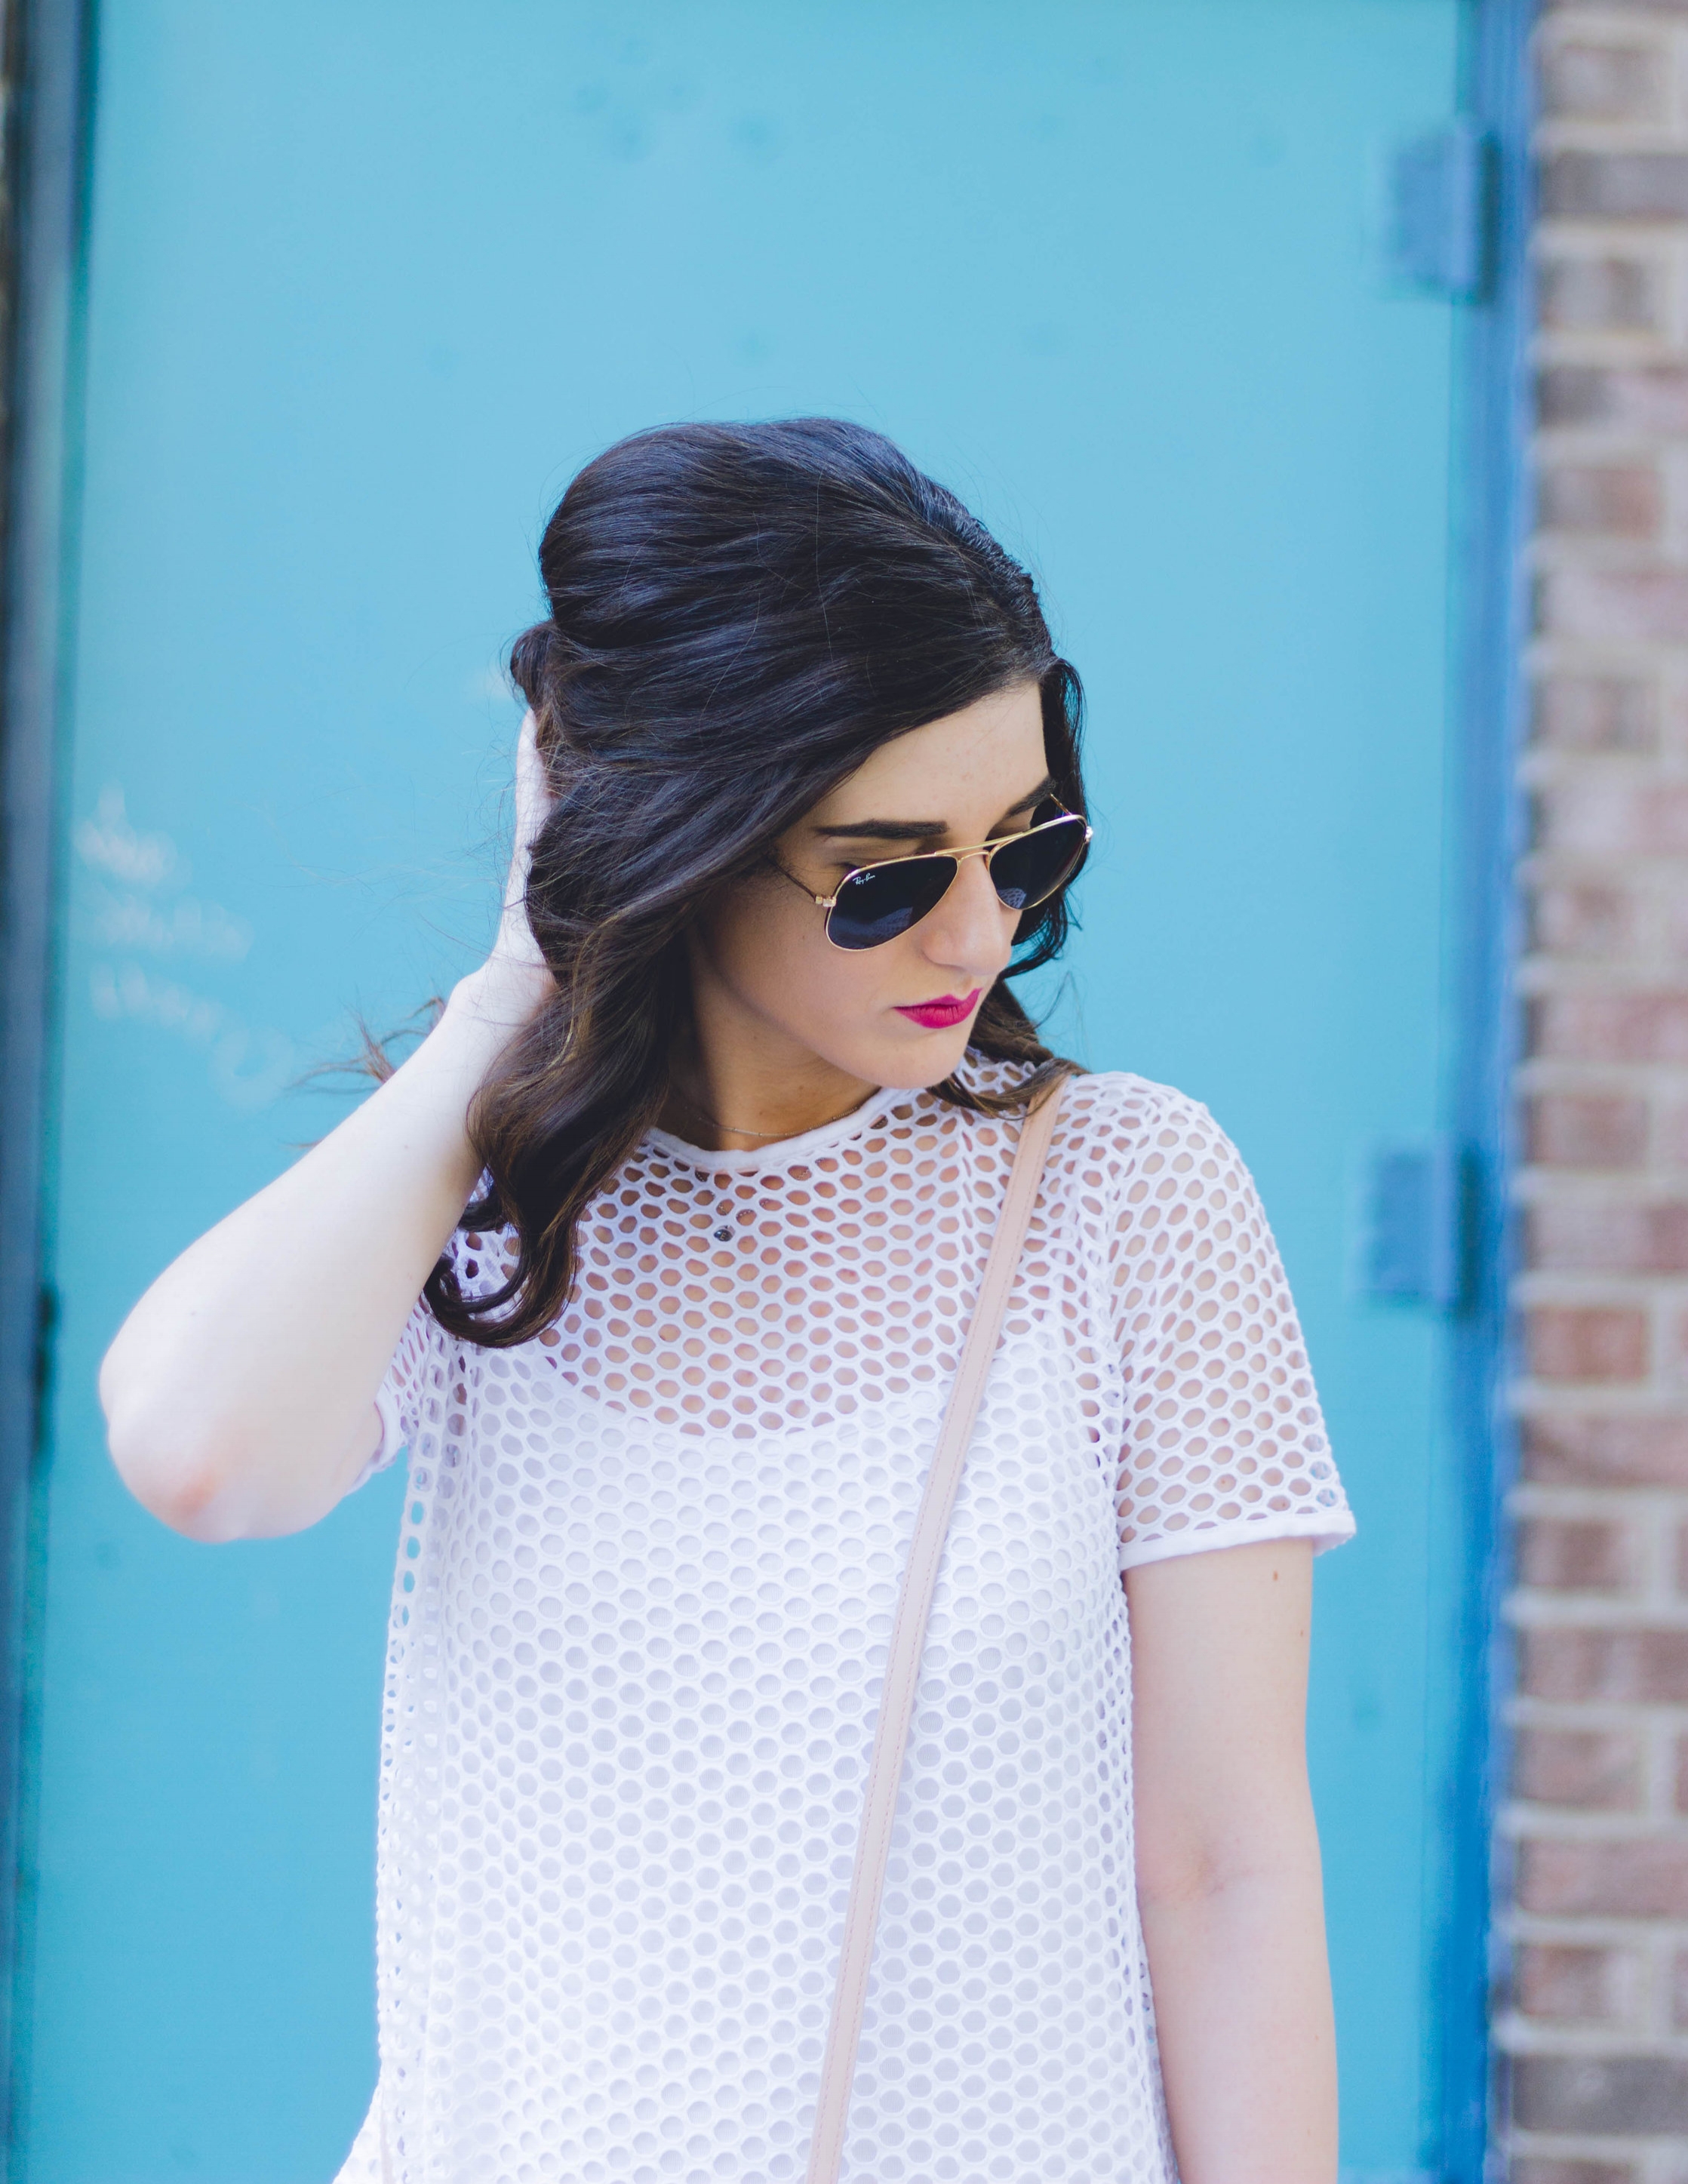 White Mesh Dress Love My Fiance Hate Being Engaged Esther Santer Fashion Blog NYC Street Style Blogger Outfit OOTD Trendy Summer Cork Wedges ASOS Dolce Vita Aviators Sunglasses RayBan Girl Women Look Inspiration  Hair Beauty Model Photoshoot New York.jpg